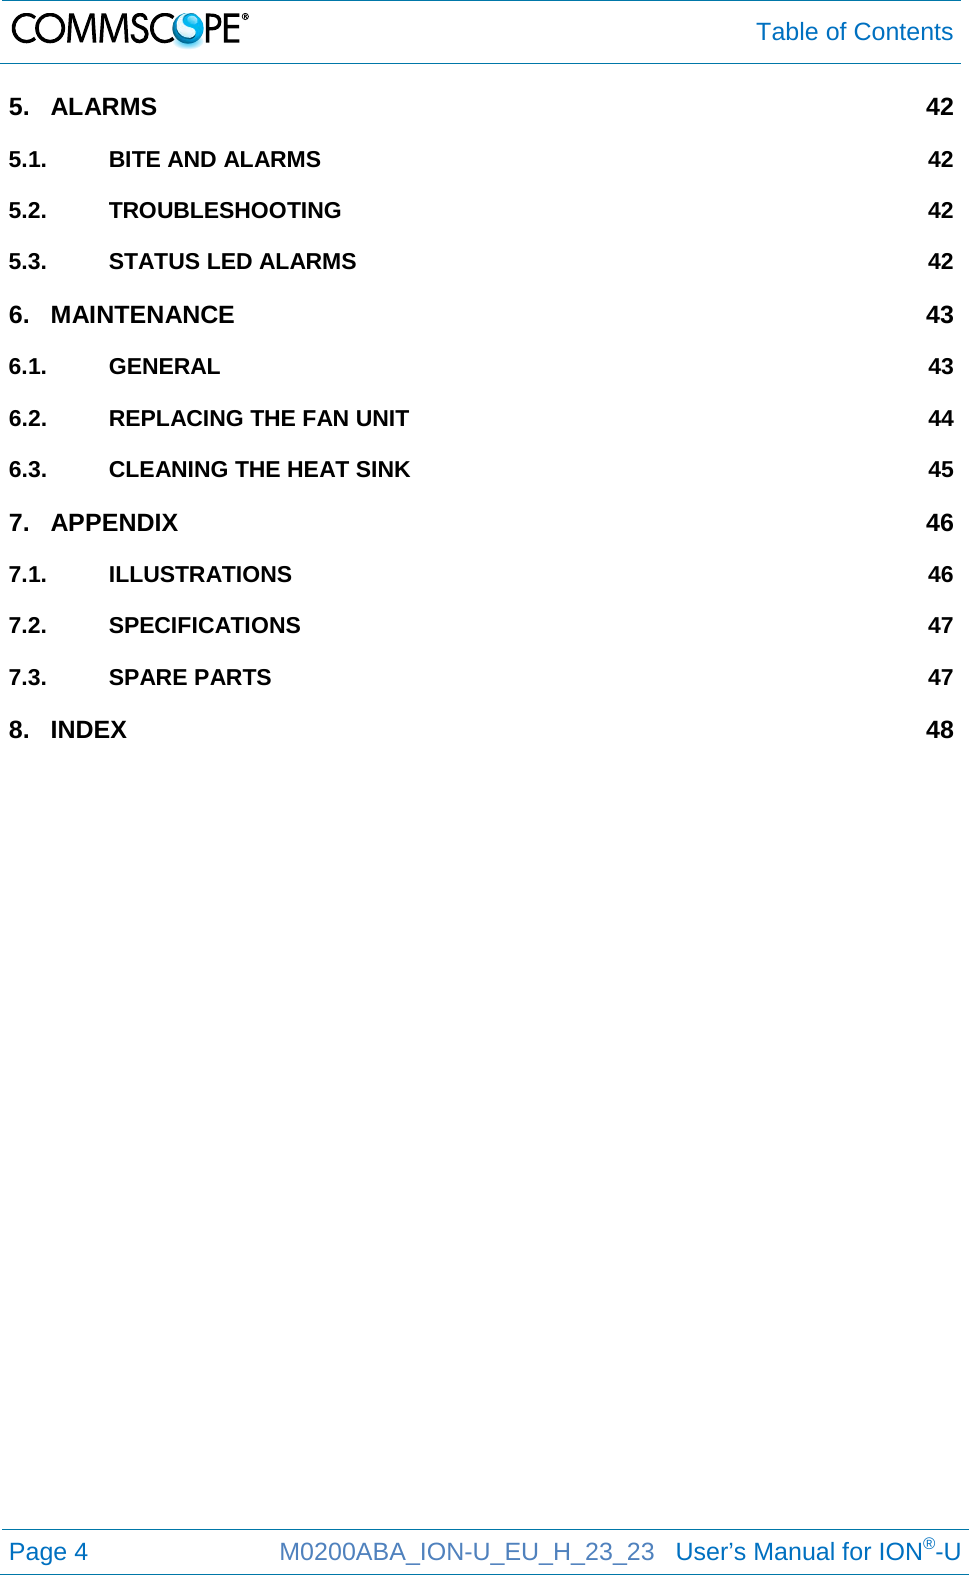  Table of Contents  Page 4  M0200ABA_ION-U_EU_H_23_23   User’s Manual for ION®-U  5. ALARMS 42 5.1. BITE AND ALARMS 42 5.2. TROUBLESHOOTING 42 5.3. STATUS LED ALARMS 42 6. MAINTENANCE 43 6.1. GENERAL 43 6.2. REPLACING THE FAN UNIT 44 6.3. CLEANING THE HEAT SINK 45 7. APPENDIX 46 7.1. ILLUSTRATIONS 46 7.2. SPECIFICATIONS 47 7.3. SPARE PARTS 47 8. INDEX 48  